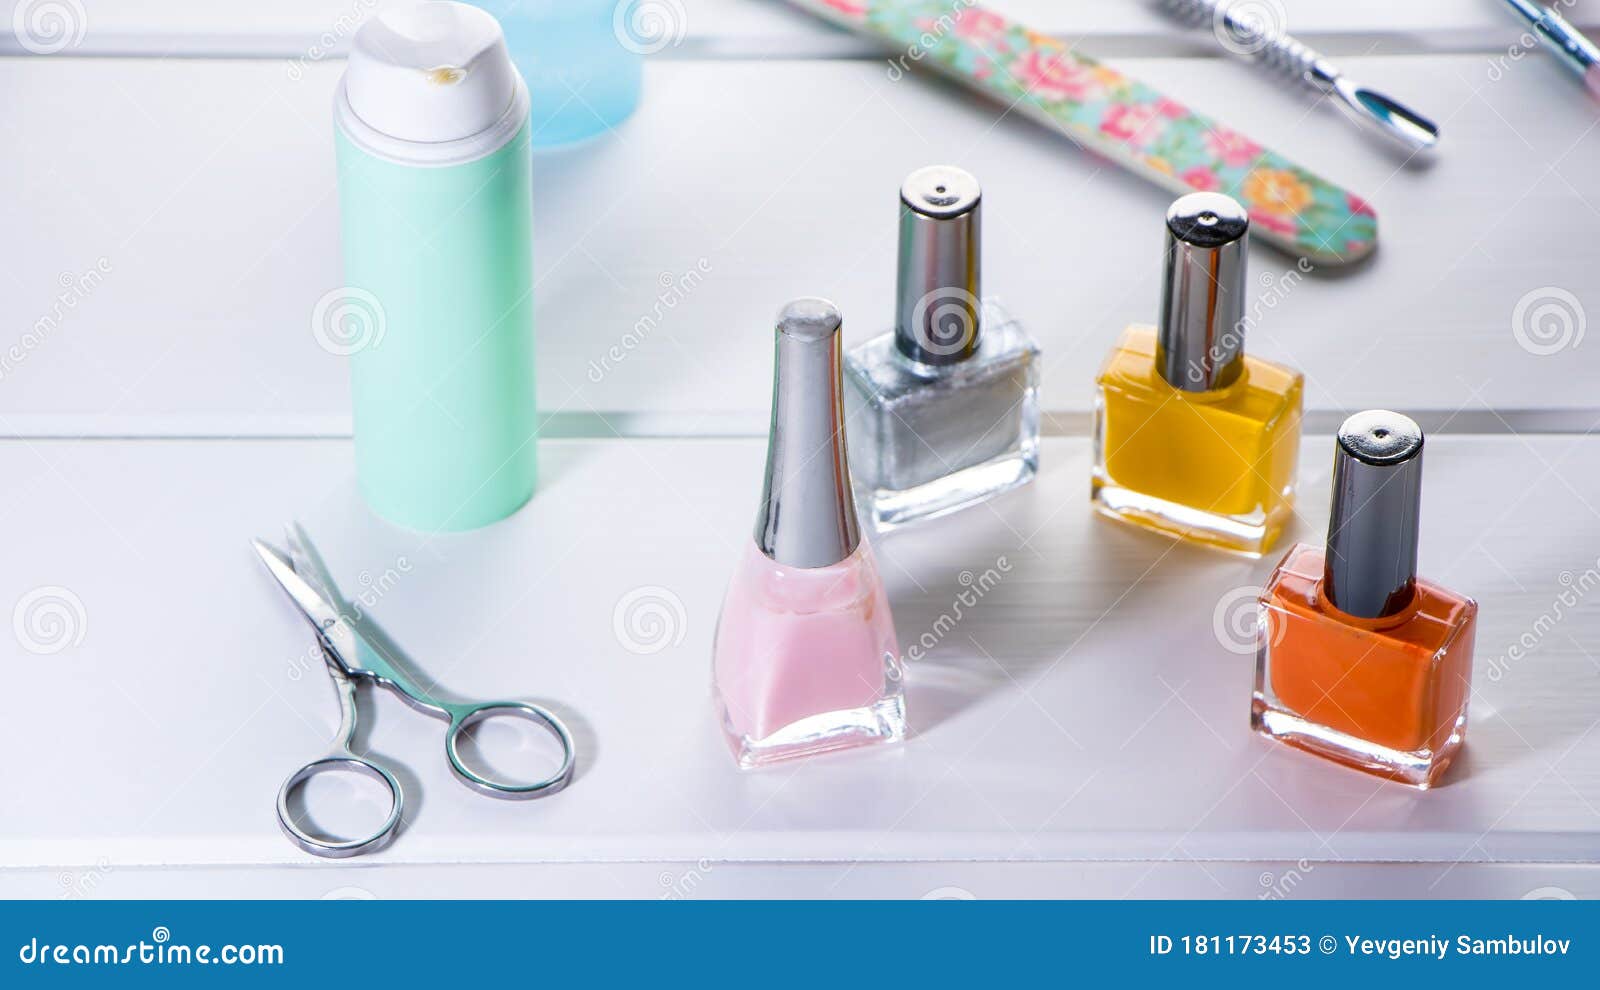 Manicure or Pedicure Set Tools are Placed on a Table with a White Towel in  the Beauty Salon. Equipment for Beauty Shop or Beauty Stock Image - Image  of metal, nail: 181173453